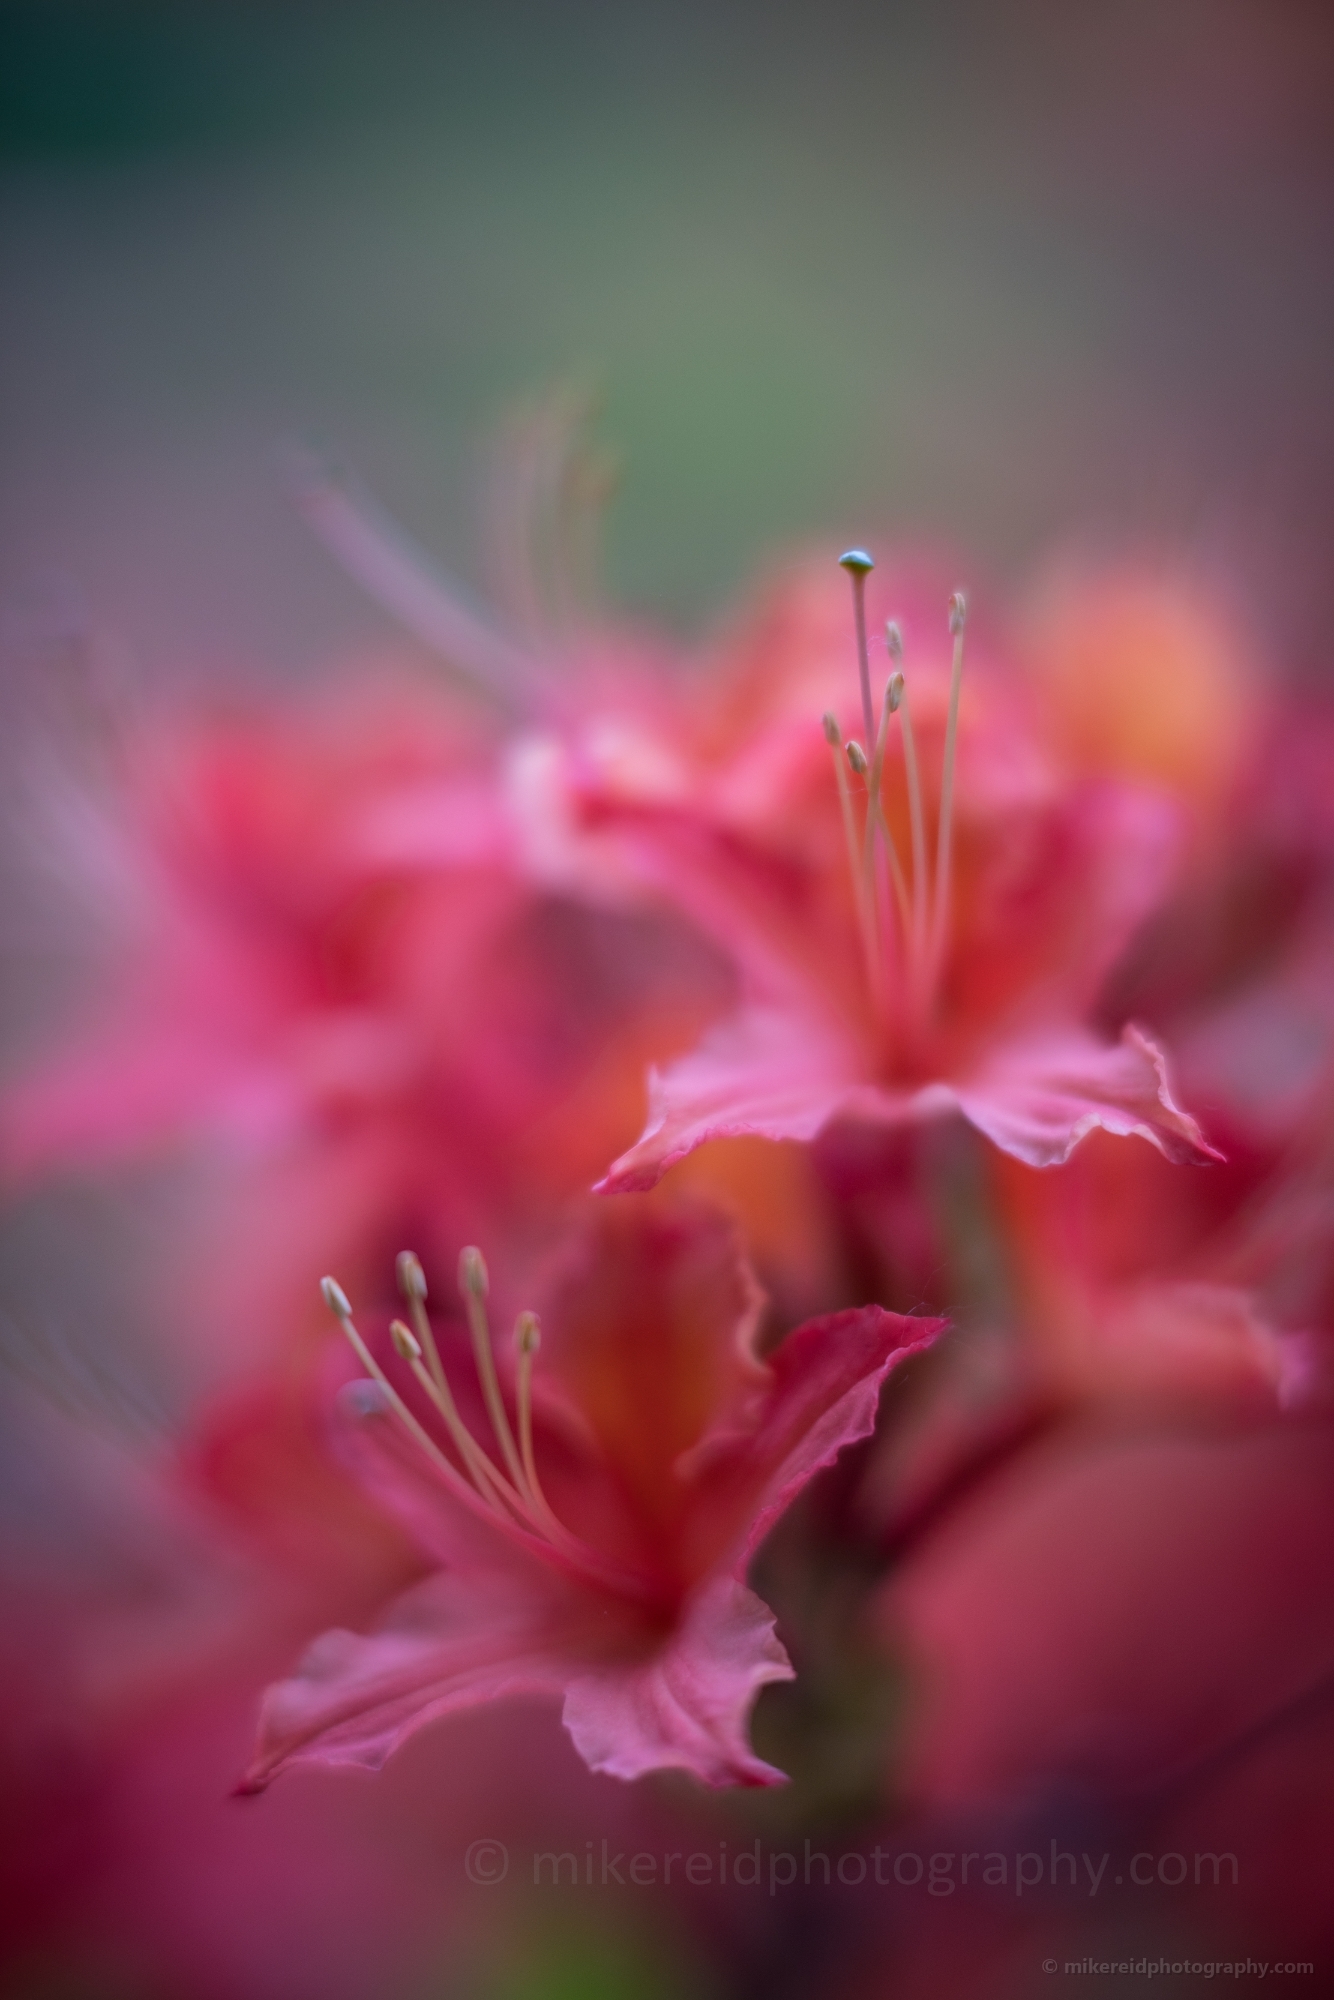 Rhododendron and Azaleas Photography Beautiful Closeup Details.jpg 